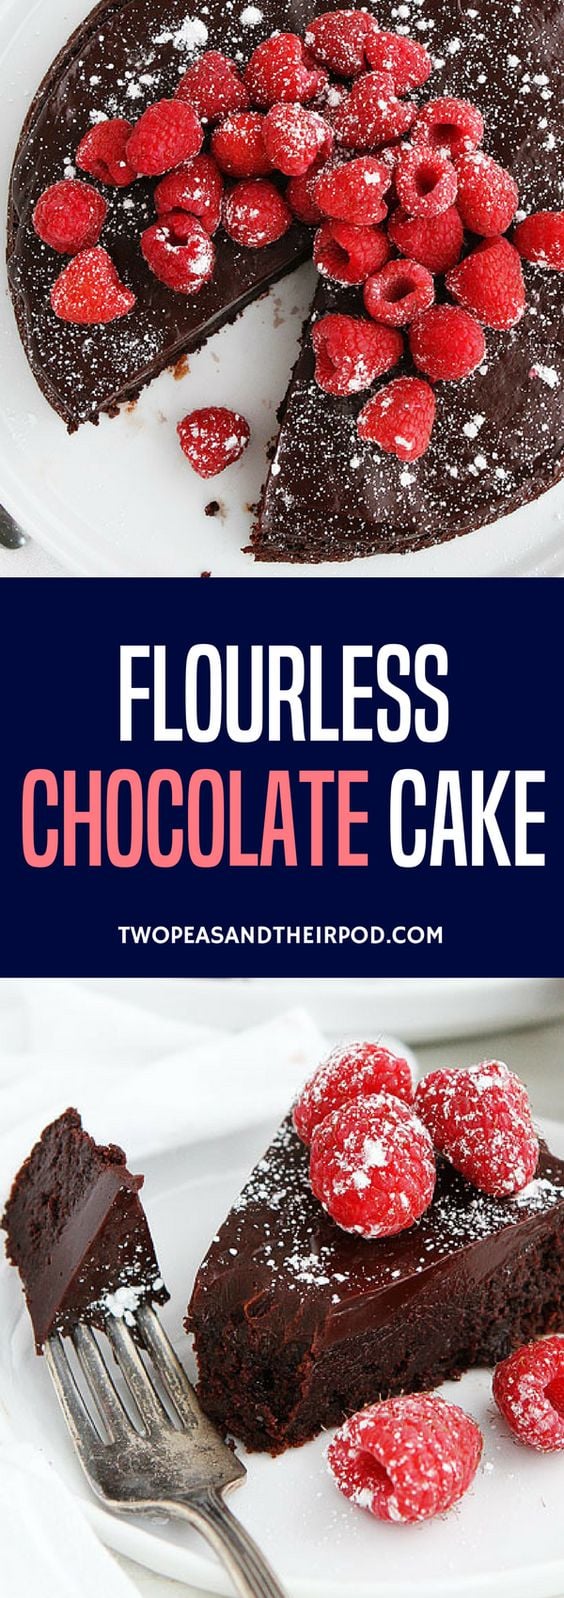 Flourless Chocolate Cake is the ultimate chocolate cake! This easy gluten-free chocolate cake is the BEST chocolate cake recipe! It is rich, fudgy, and SO decadent! #chocolate #chocolatecake #dessert #glutenfree #ValentinesDay